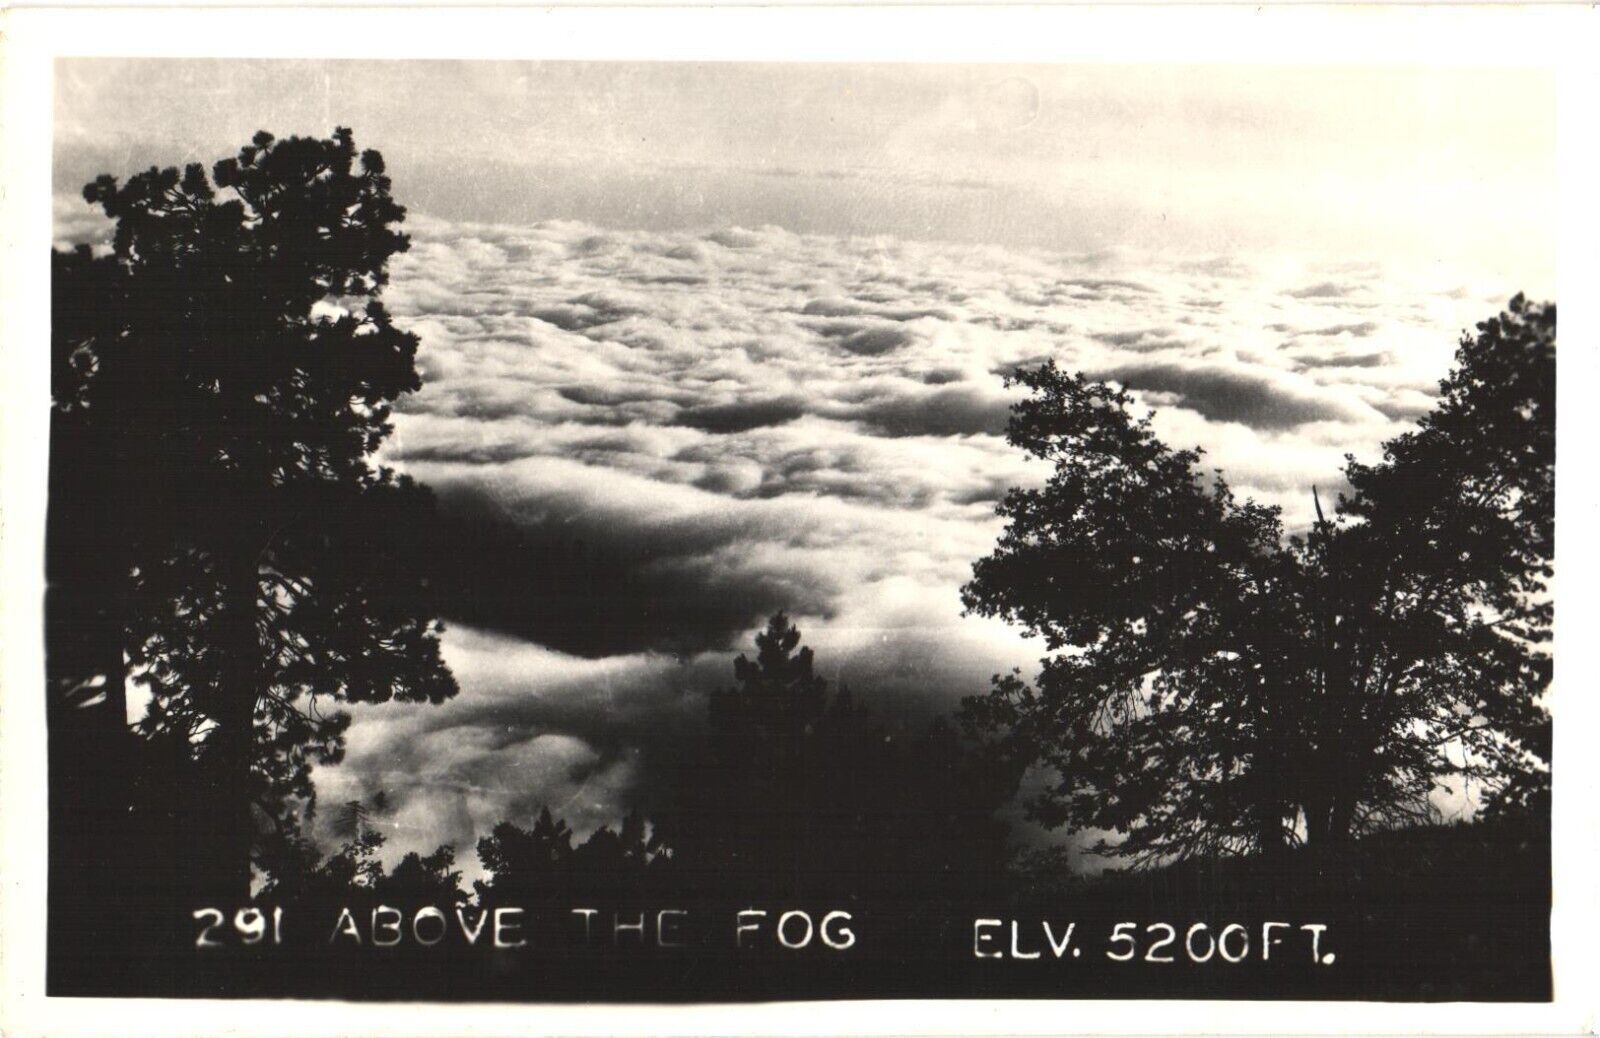 Breath-taking Photograph Above The Fog, Elevation 5200 FT Postcard